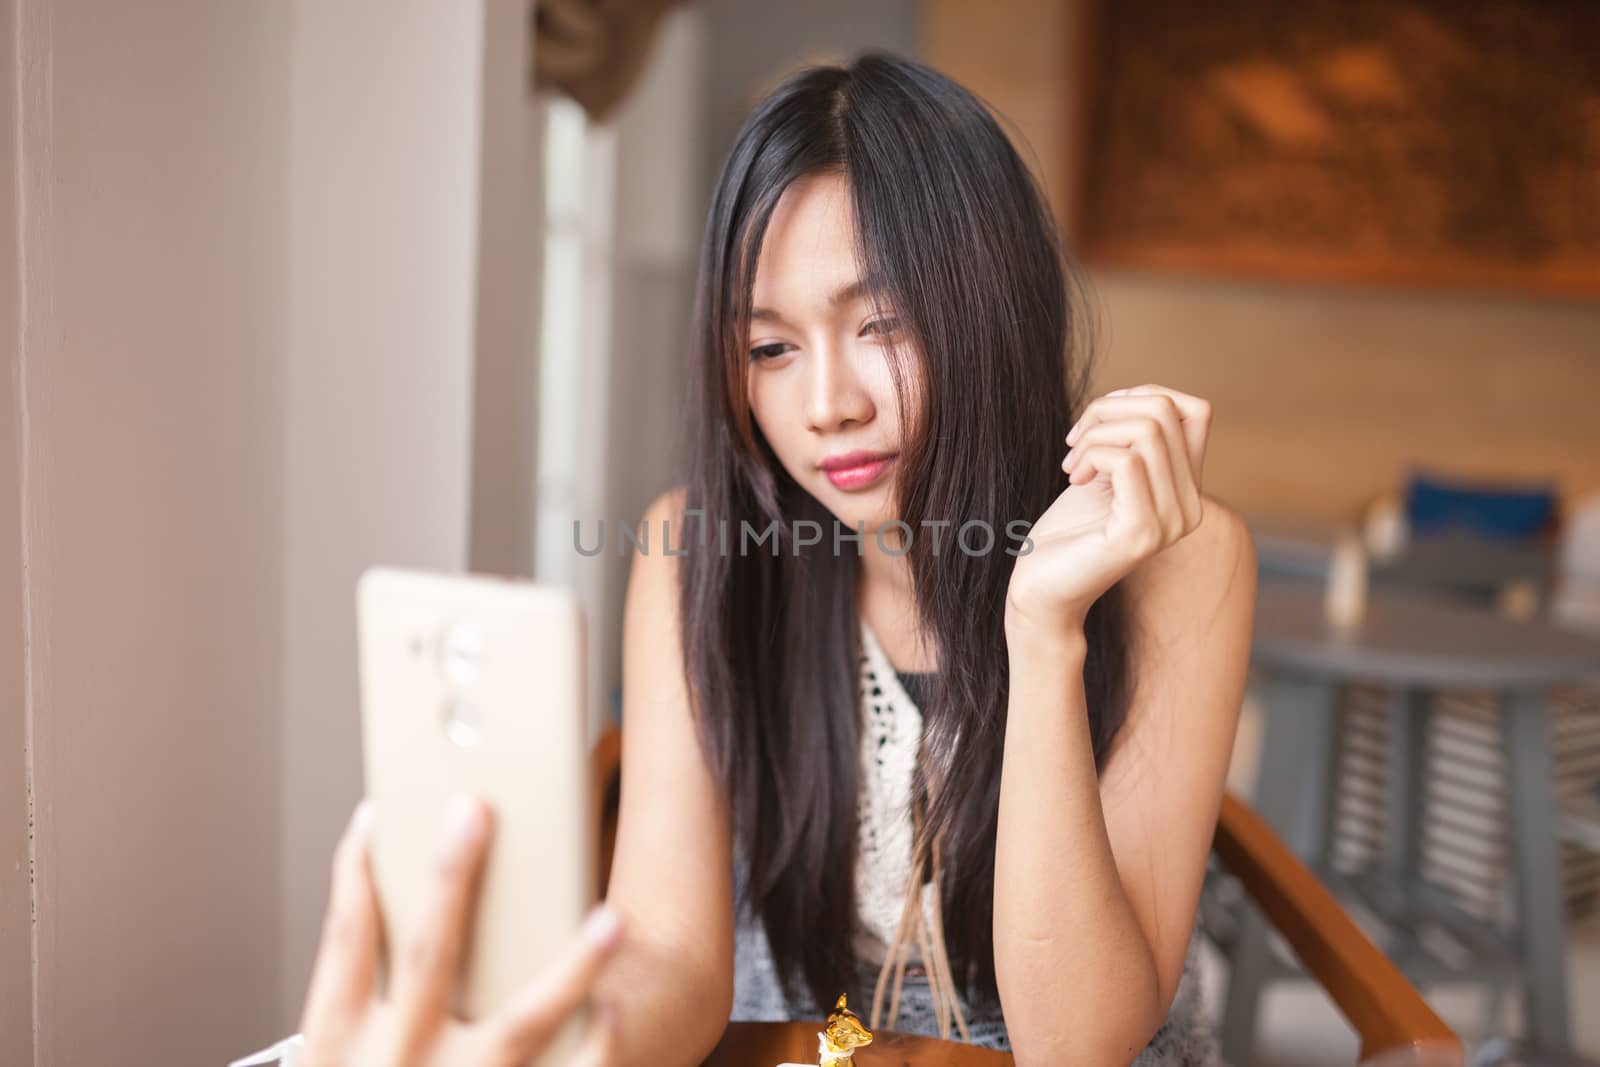 Home, technology and lifestyle concept - A women using smartphone for capture selfie .